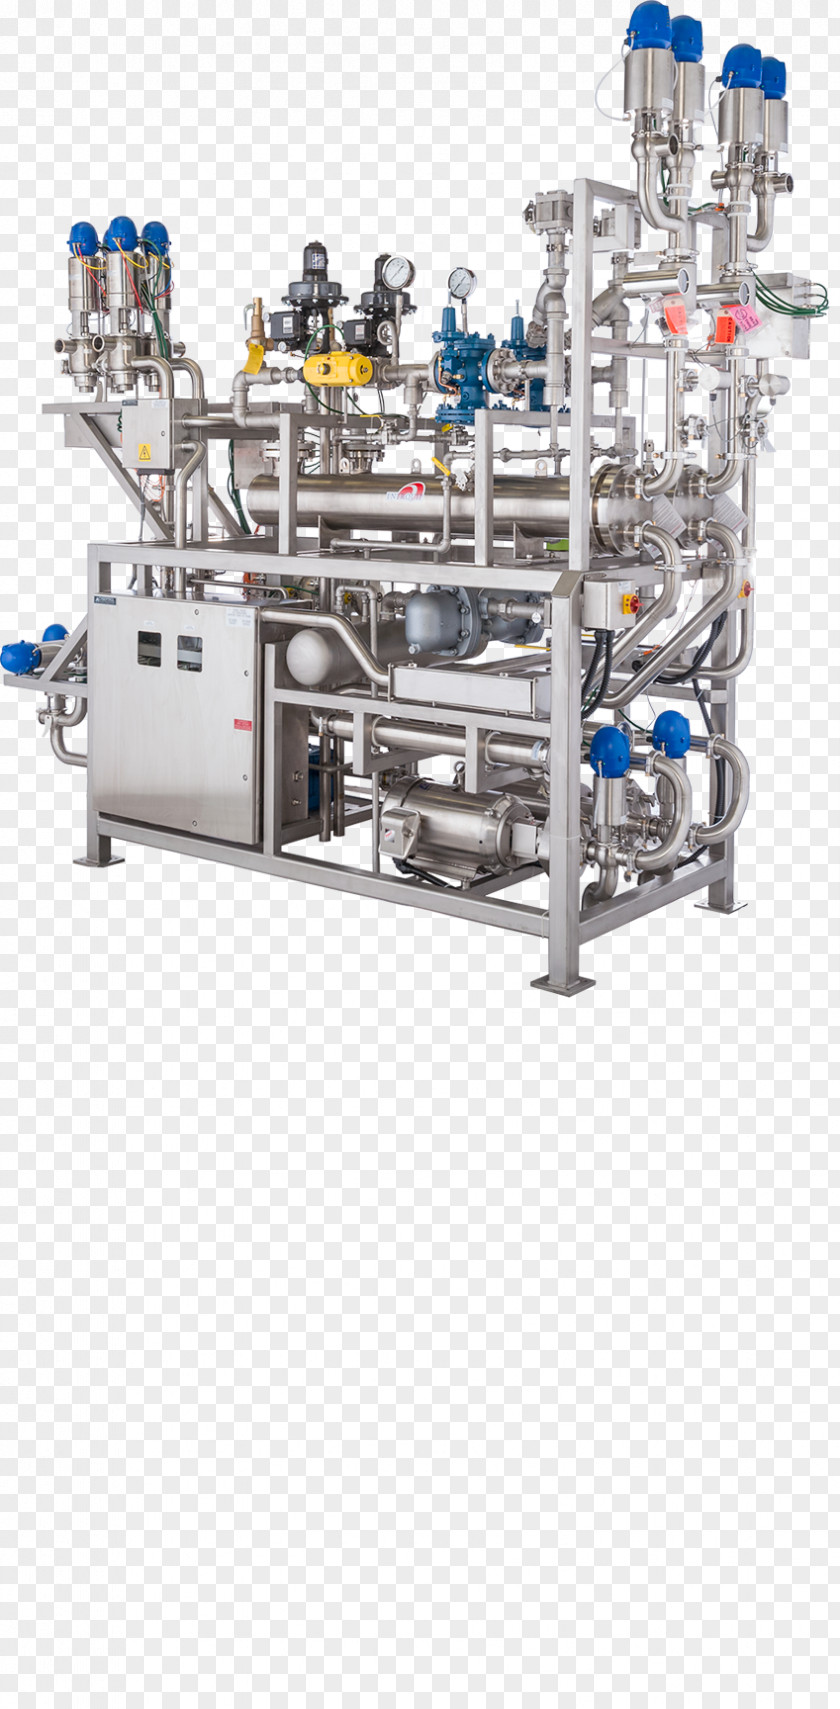 Skids Papakura Central Modular Process Skid Engineering Industry System PNG